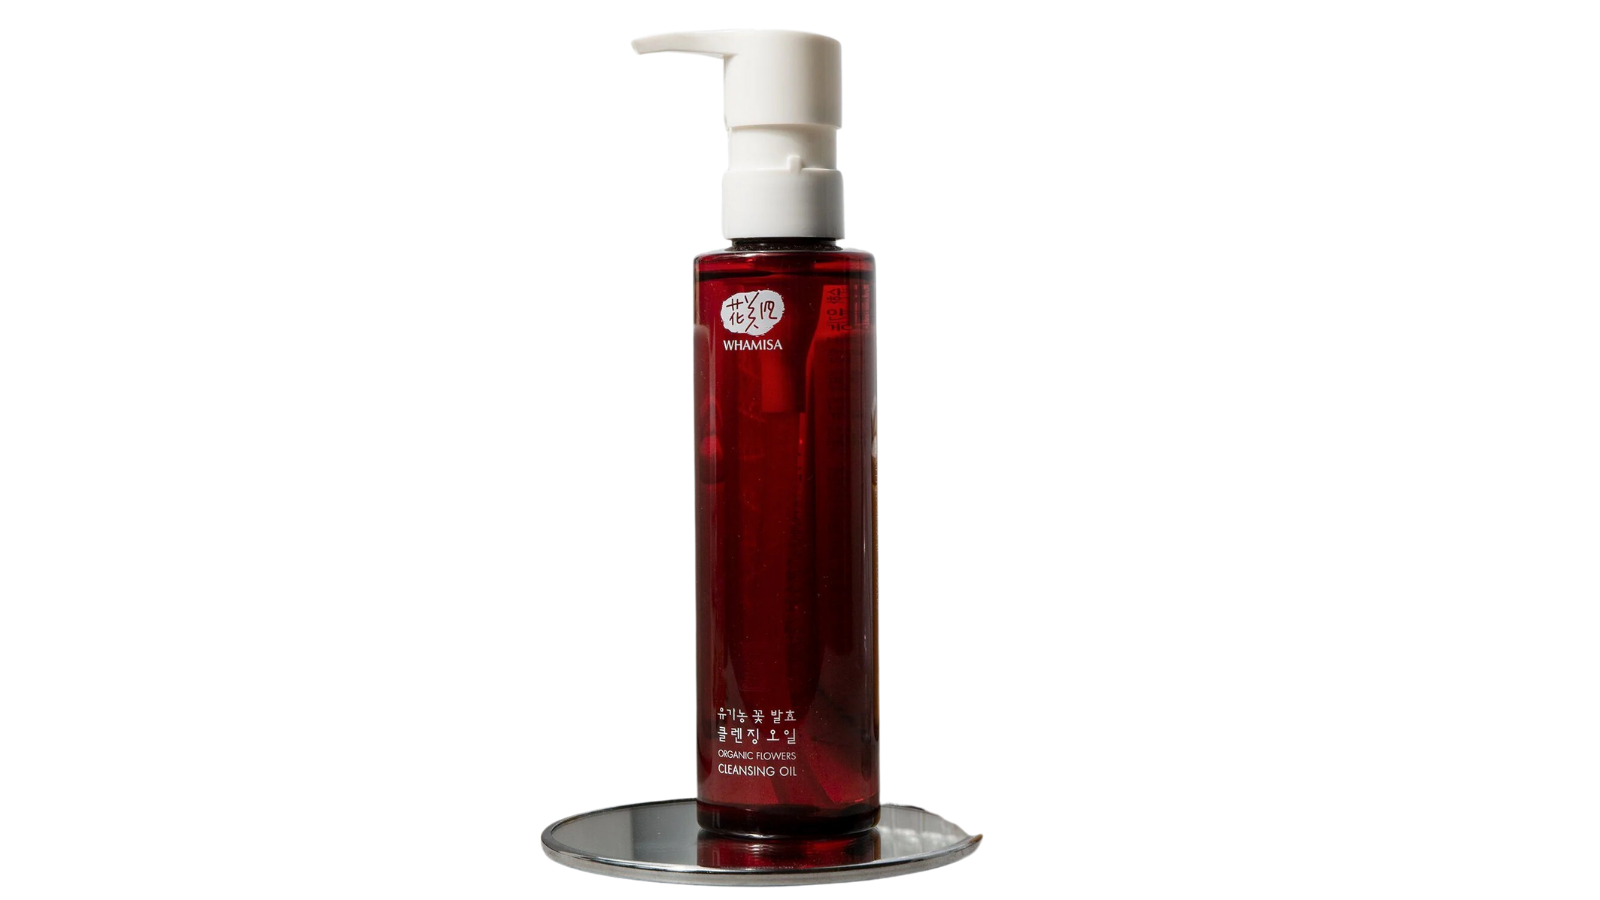 whamisa cleansing oil